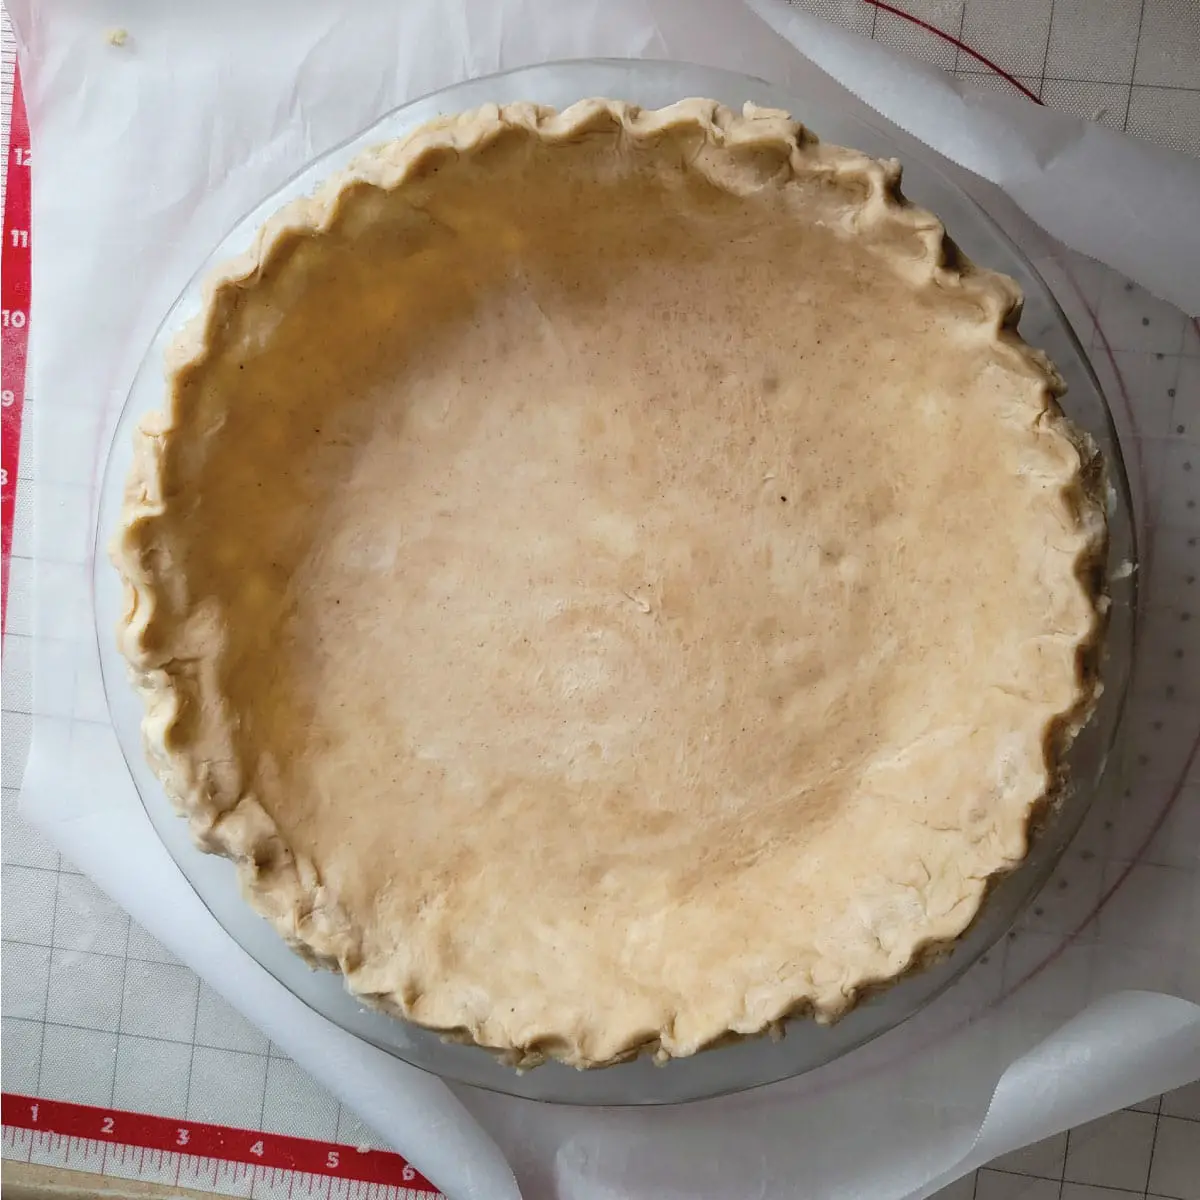 Homemade pie dough in a pie plate ready to add filling.